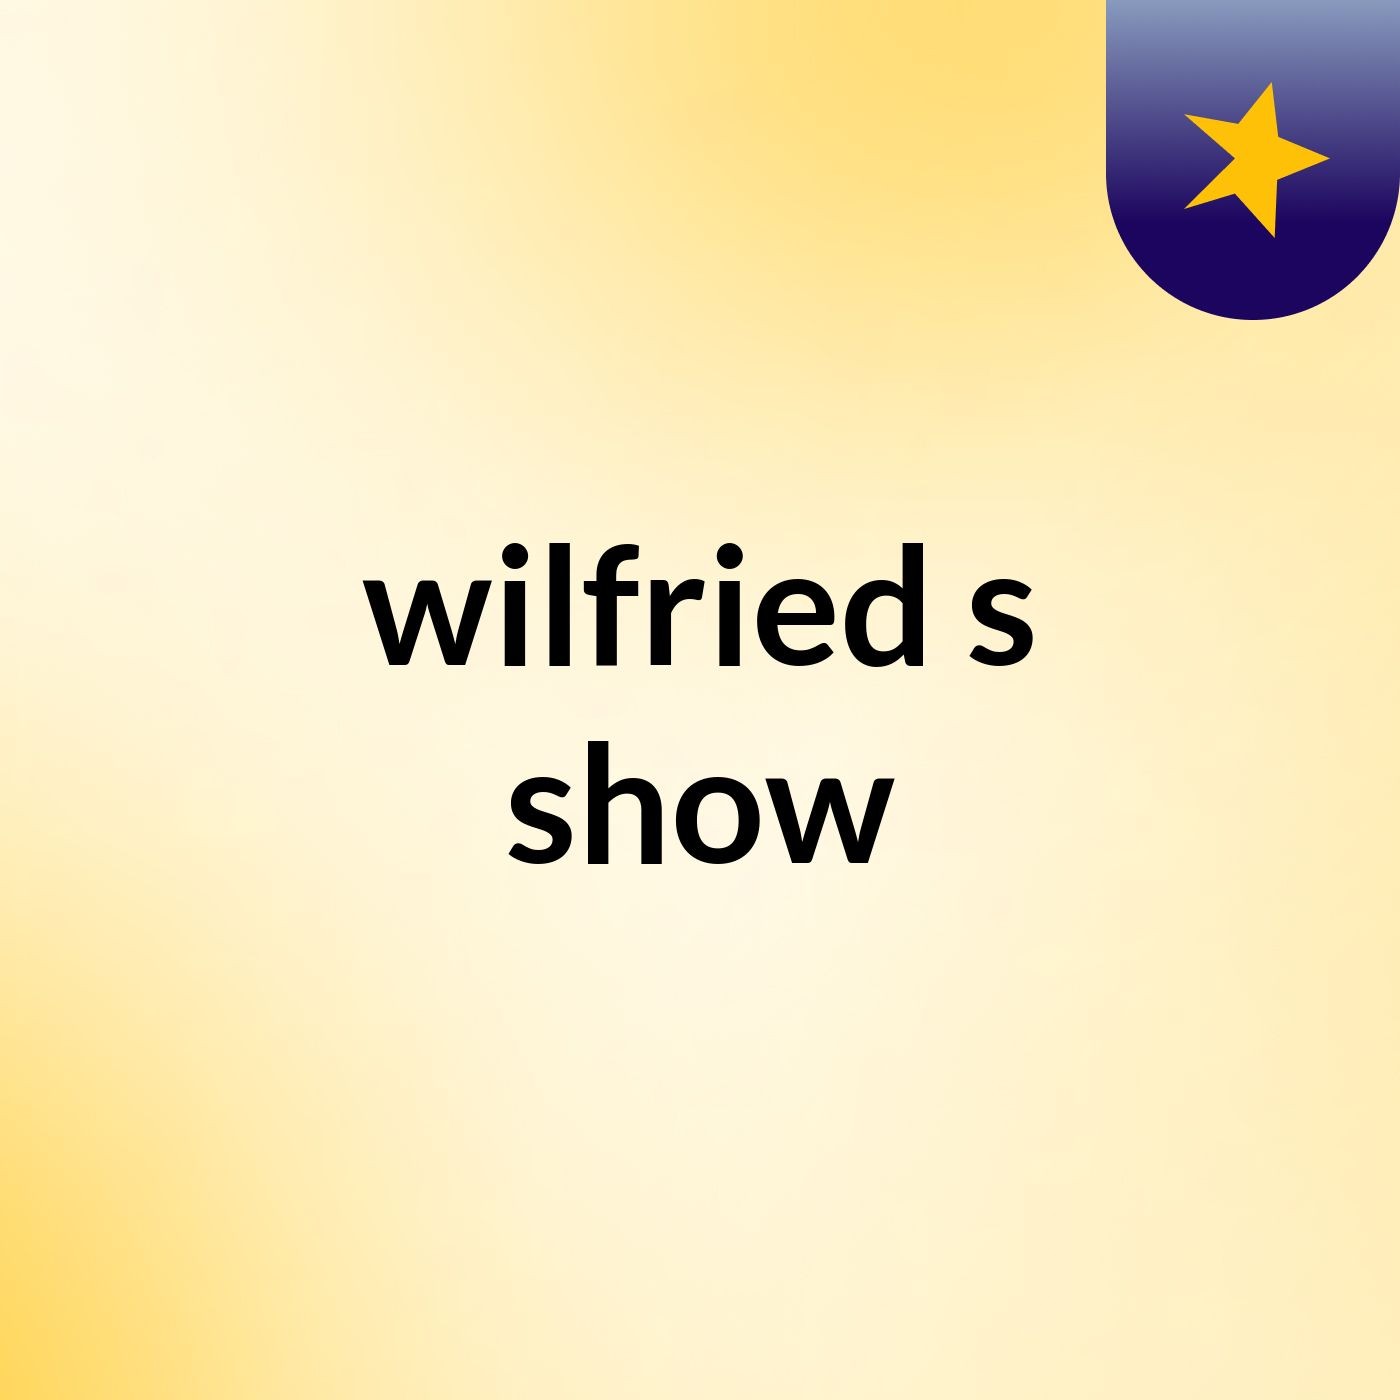 wilfried's show